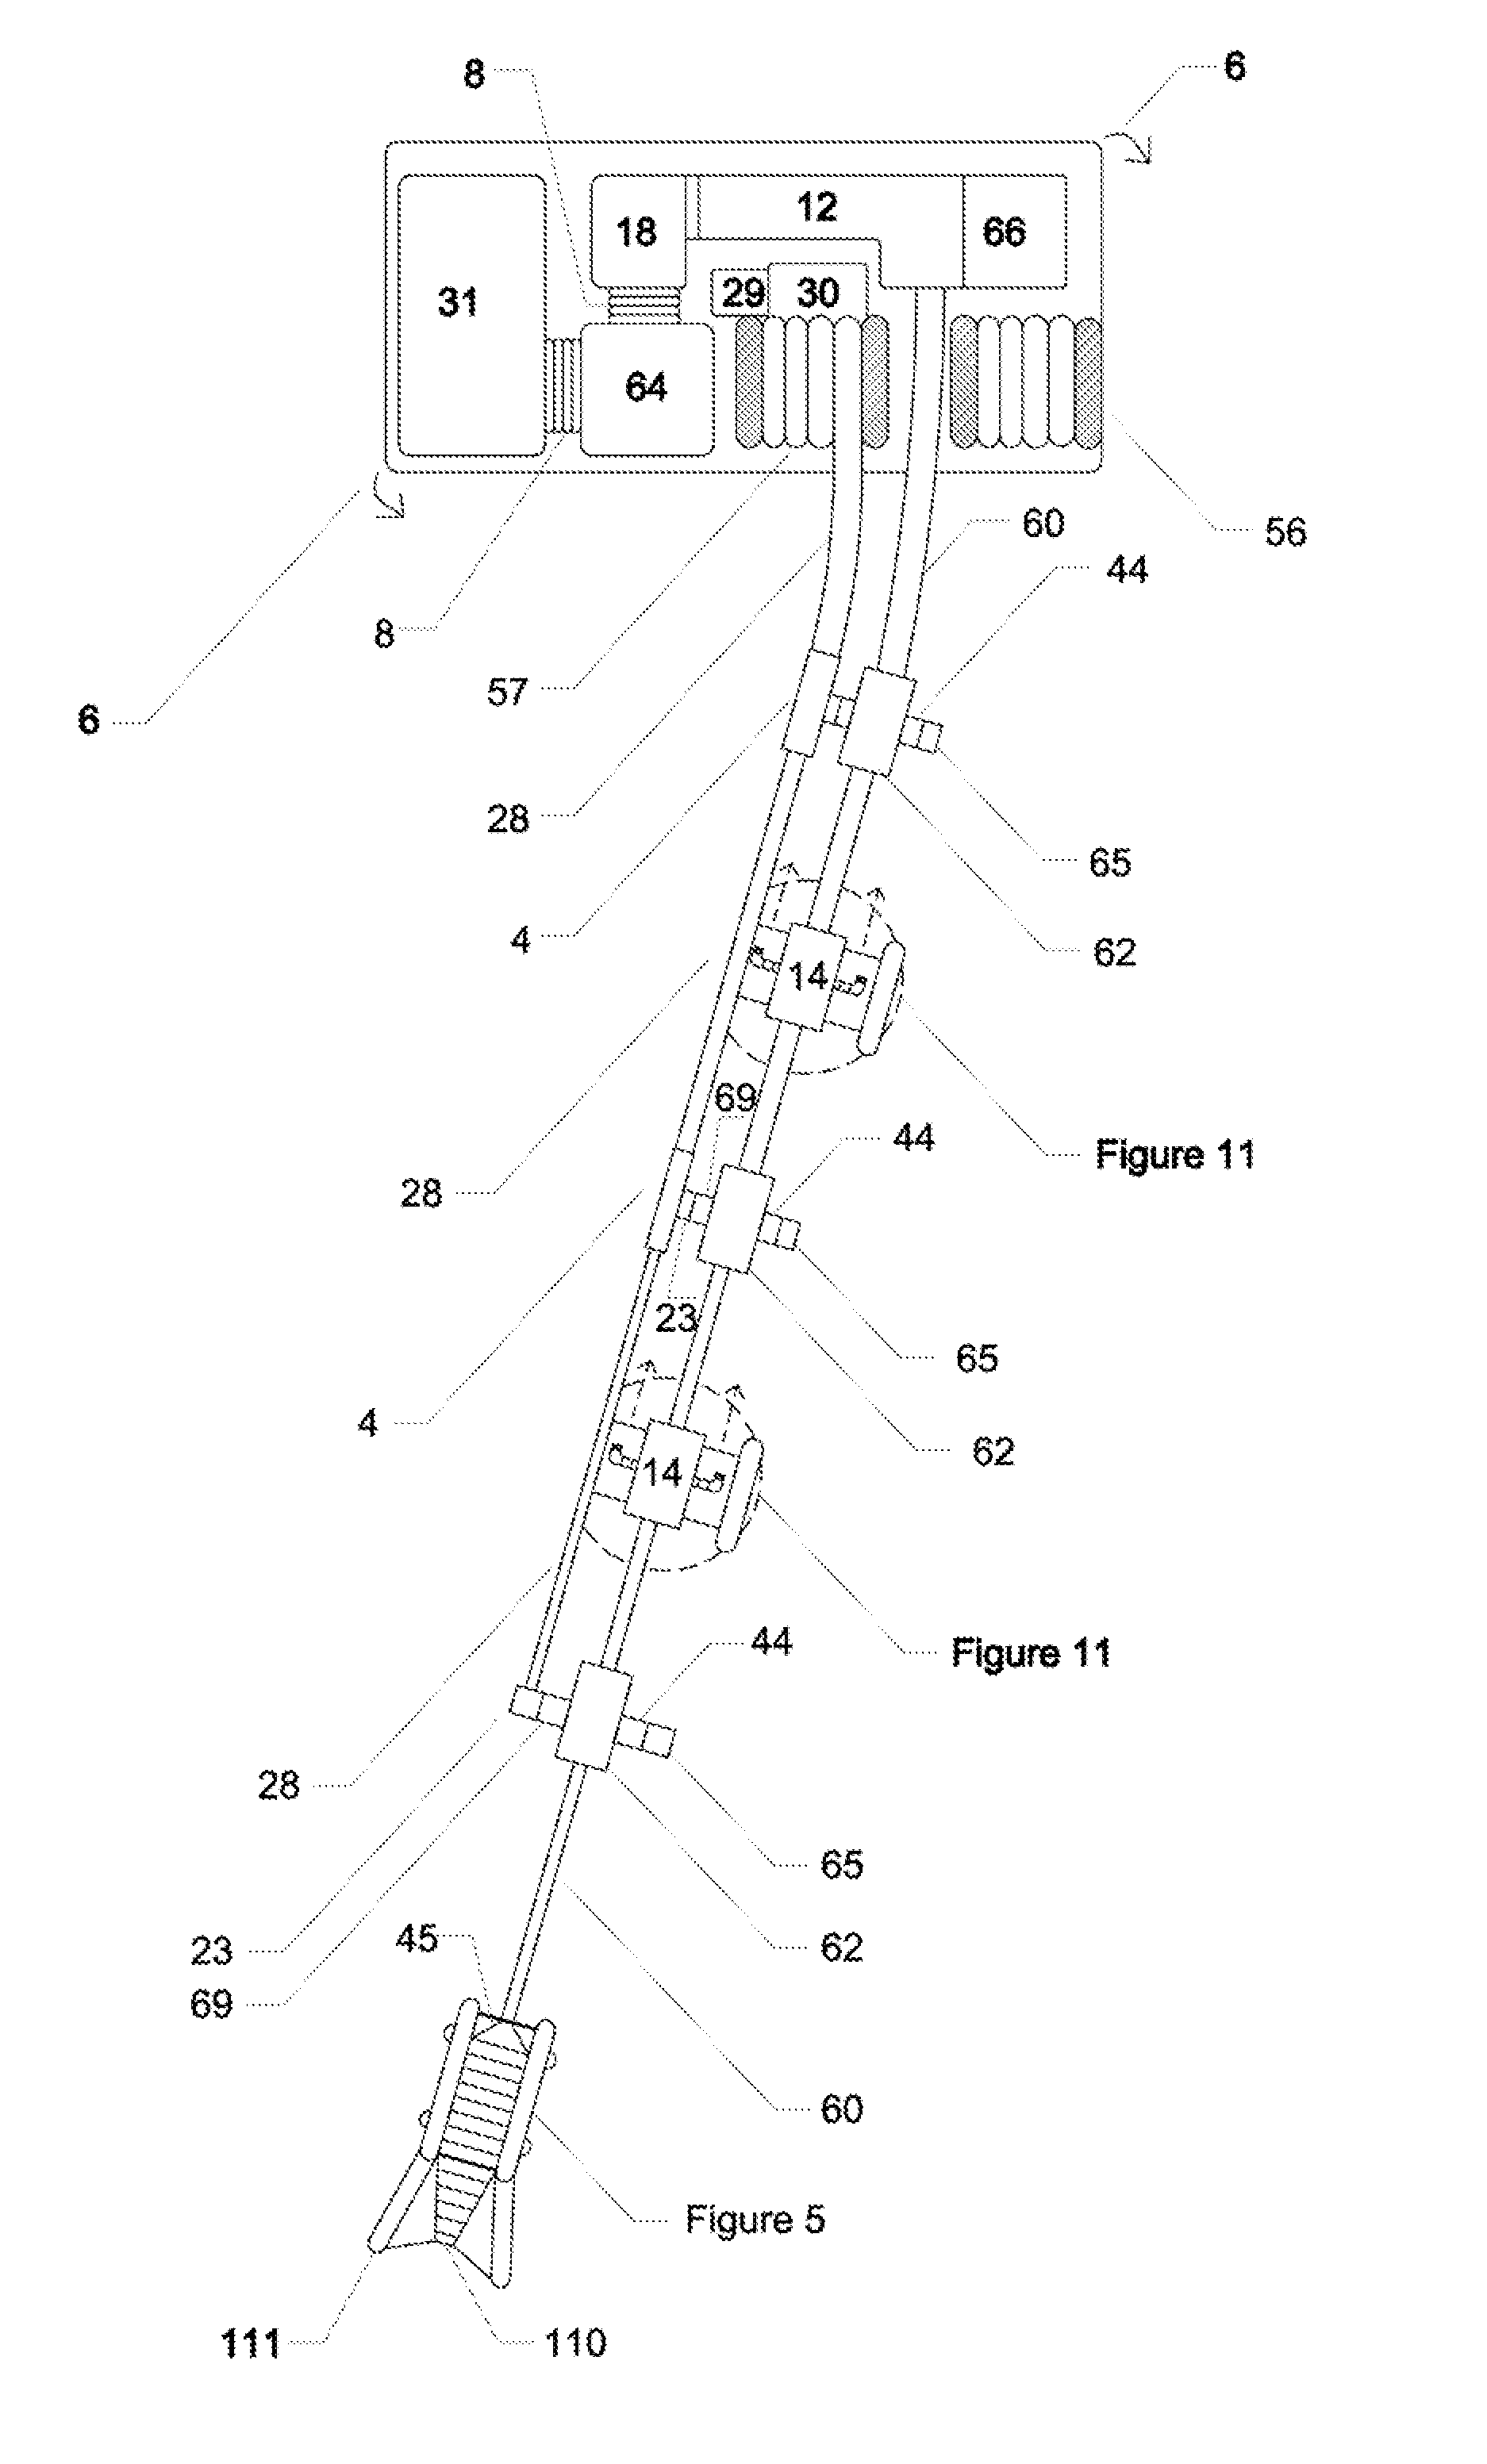 Apparatus for Vacuuming Pollution from a Body of Water